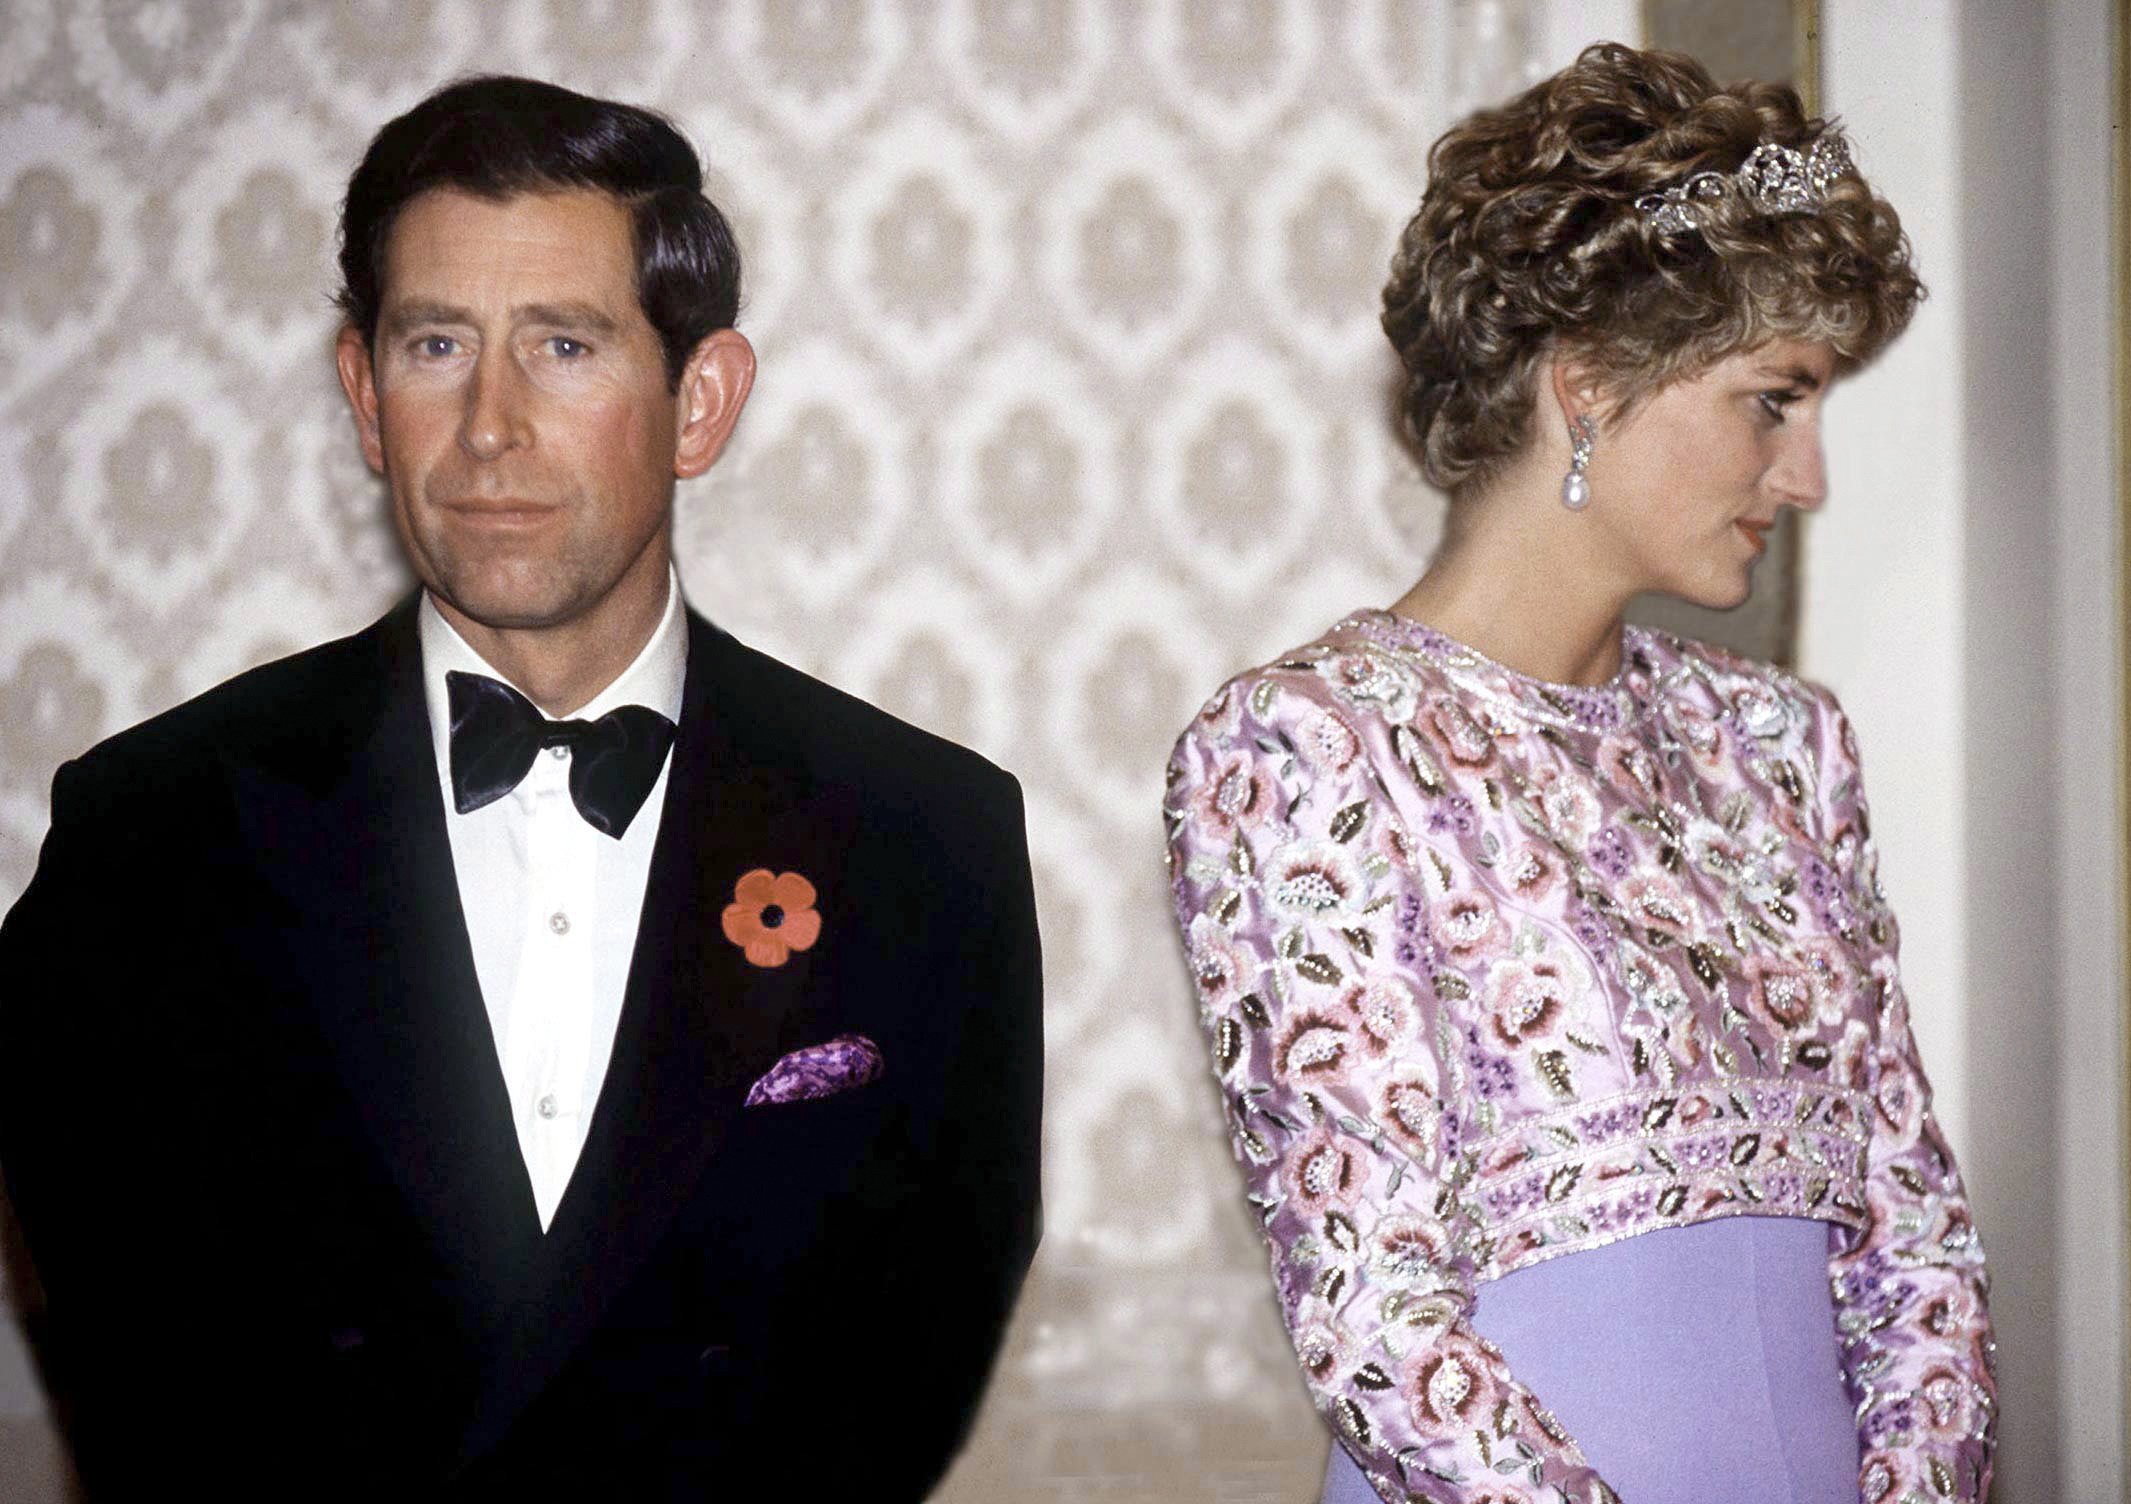 Prince Charles and Princess Diana pictured on their last official trip together at the Republic Of Korea | Source: Getty Images